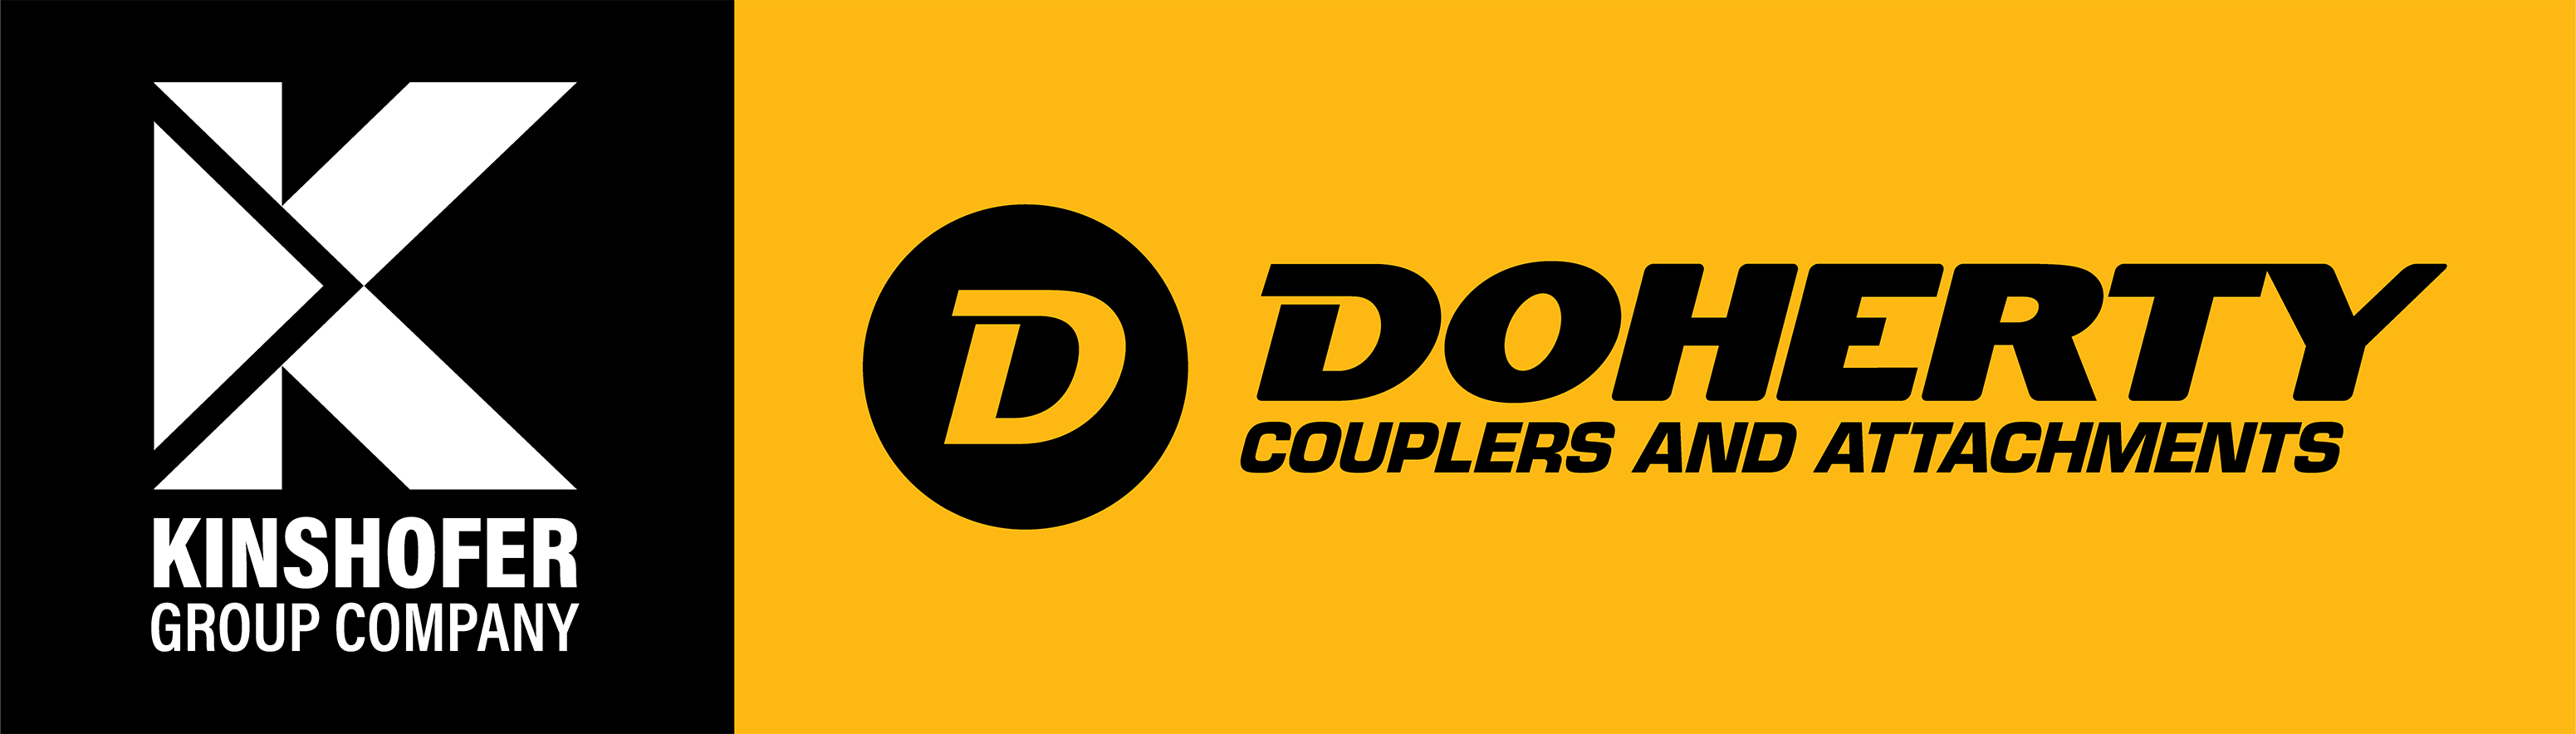 Doherty – Couplers and Attachments – A Kinshofer Company